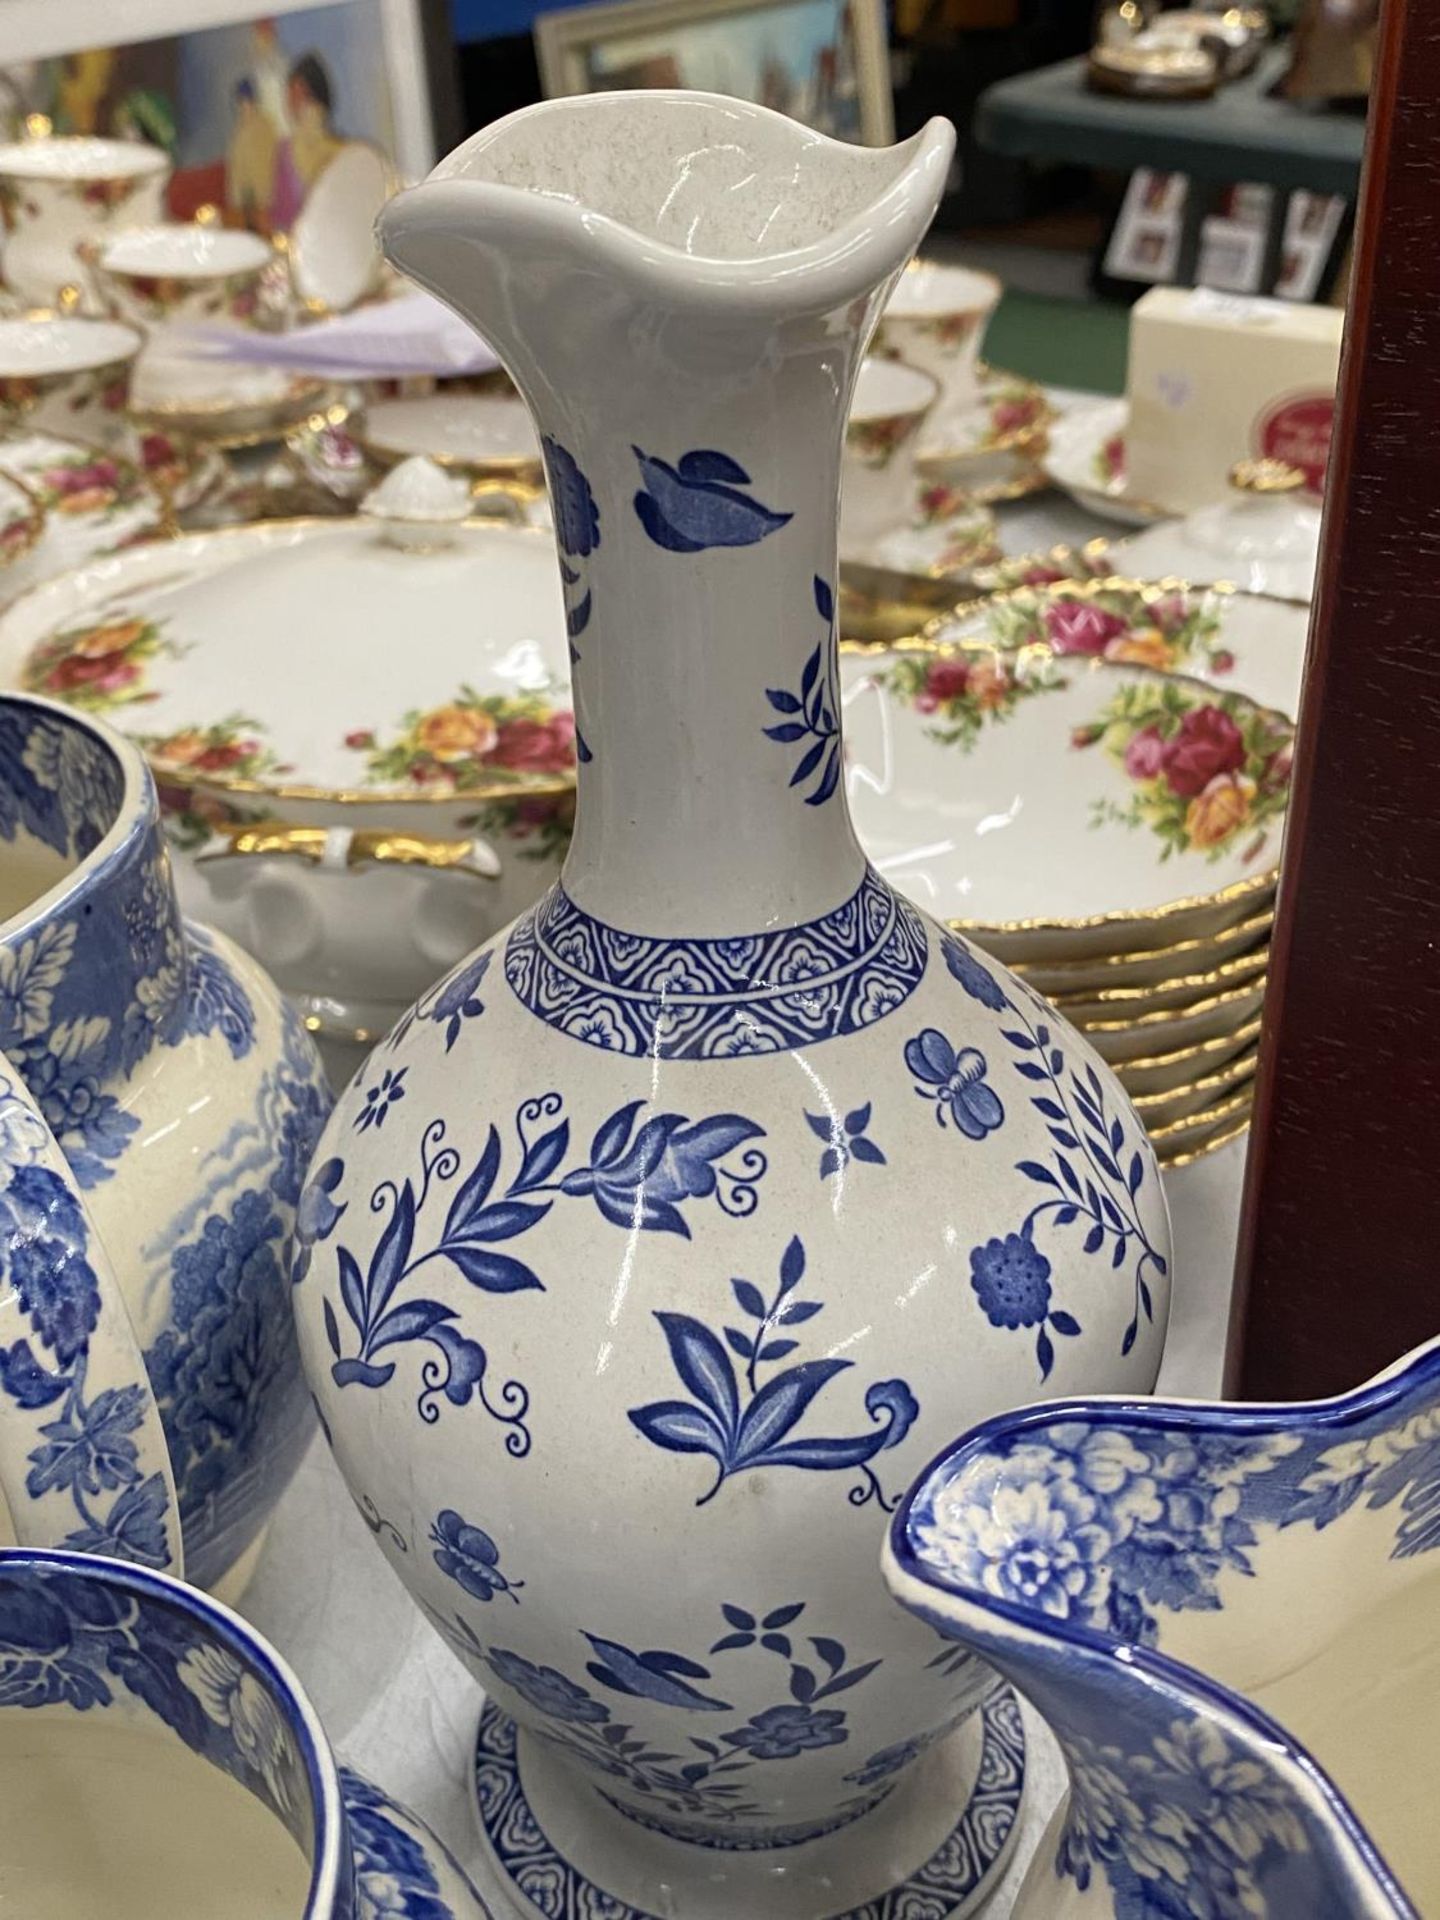 A LARGE QUANTITY OF VINTAGE BLUE AND WHITE POTTERY TO INCLUDE JUGS, BOWLS, CUPS, ETC - Image 6 of 6